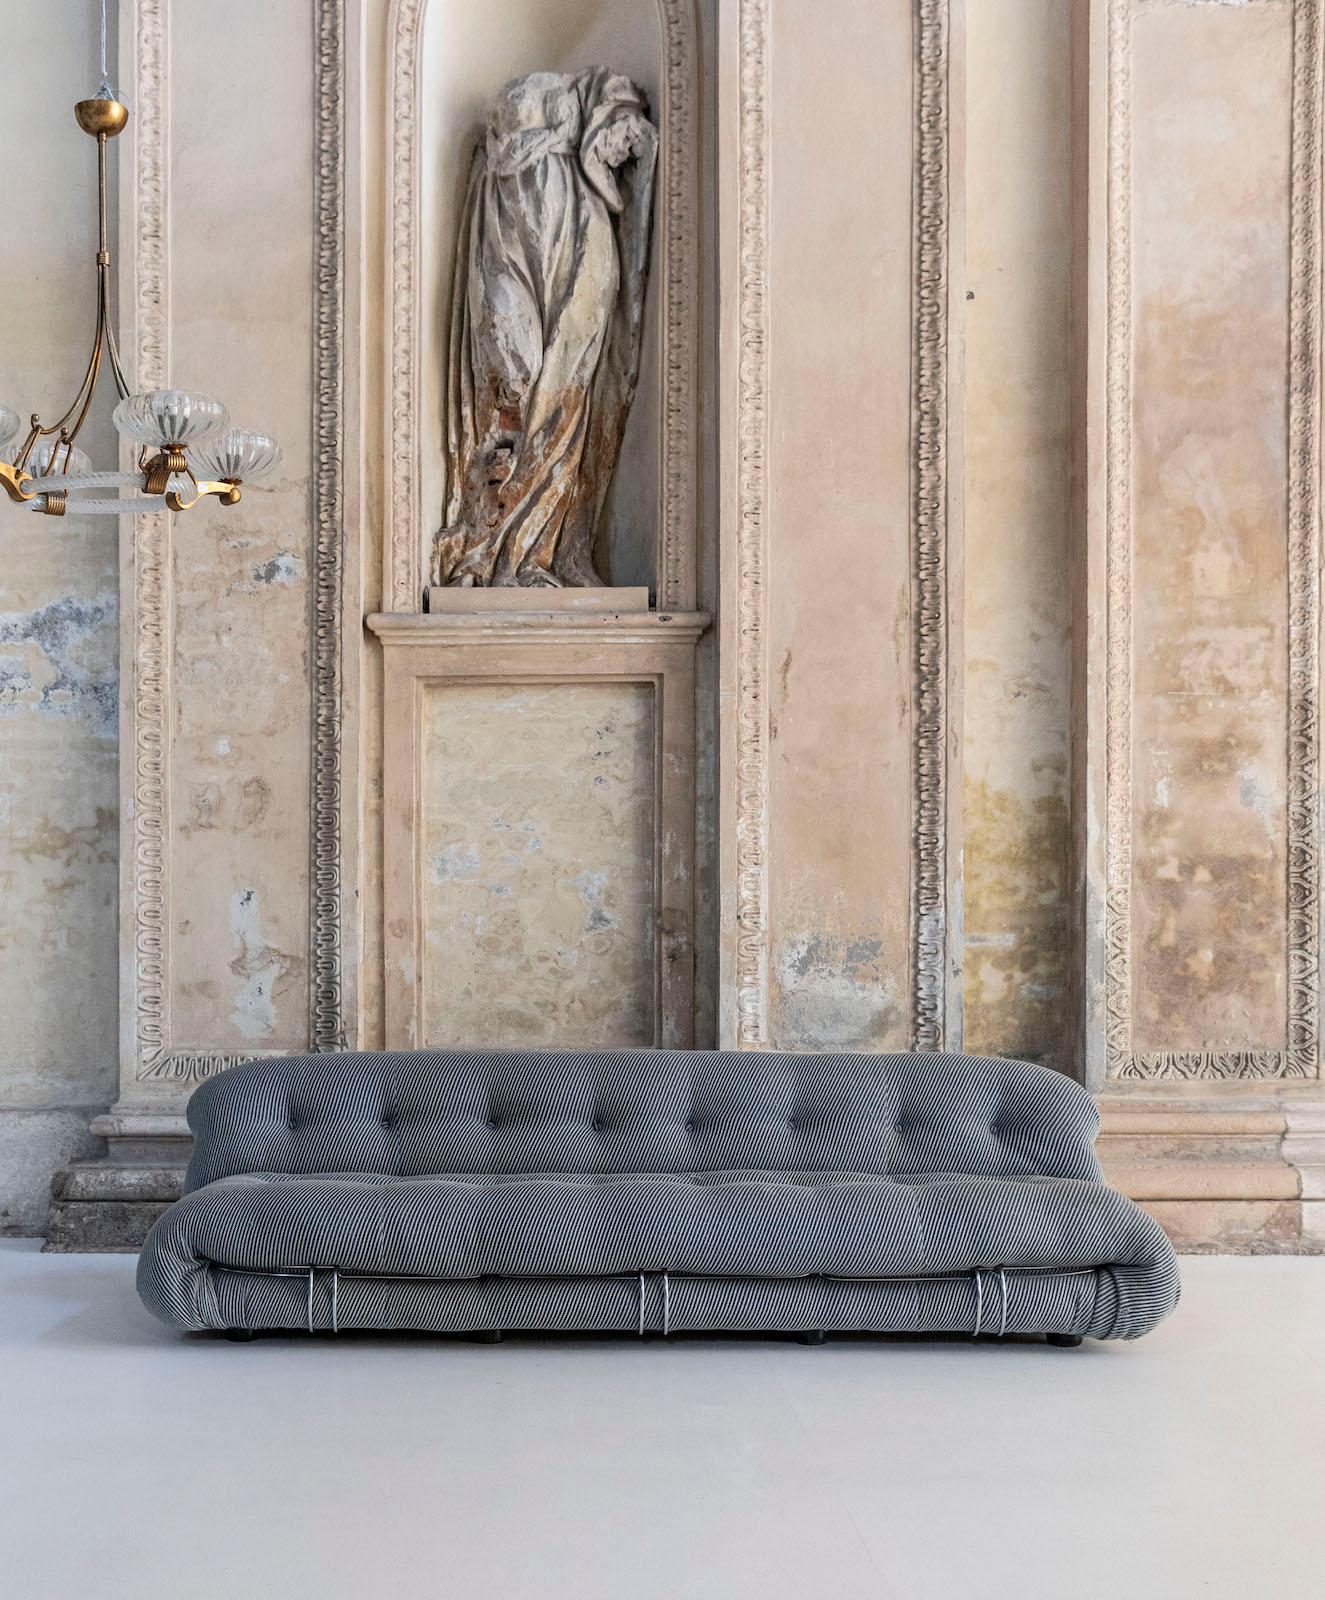 Sofa and armchair in metal structure with original gray/light blue fabric. Modern style from a production period: 1960-1979. This sofa won the Compasso d’Oro award in 1970.

Dimension:
Armchair Soriana: 100 W x 100 D cm x 65 H cm, seat height 38